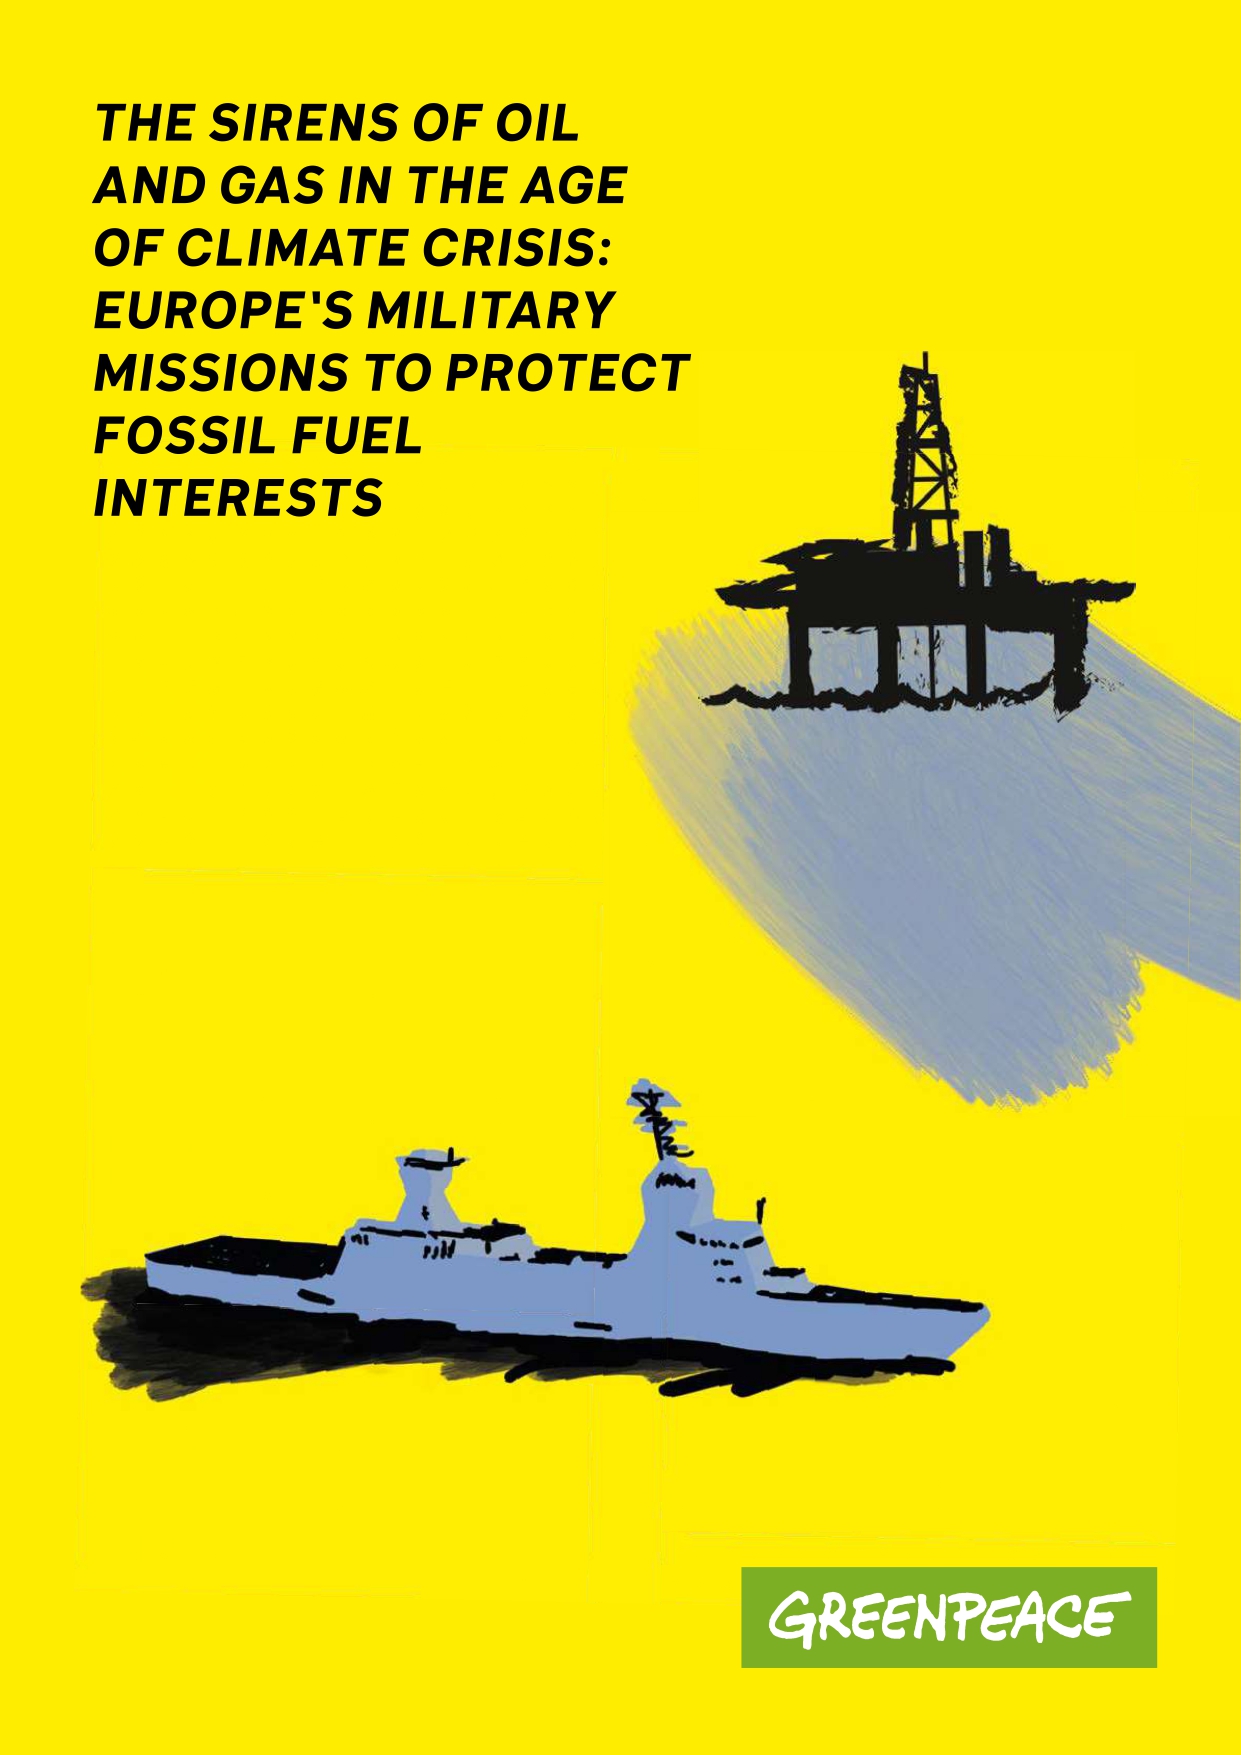 Greenpeace report with the collaboration of Centre Delàs: “The sirens of oil and gas in the age of climate crisis: Europe’s military missions to protect fossil fuels interests”